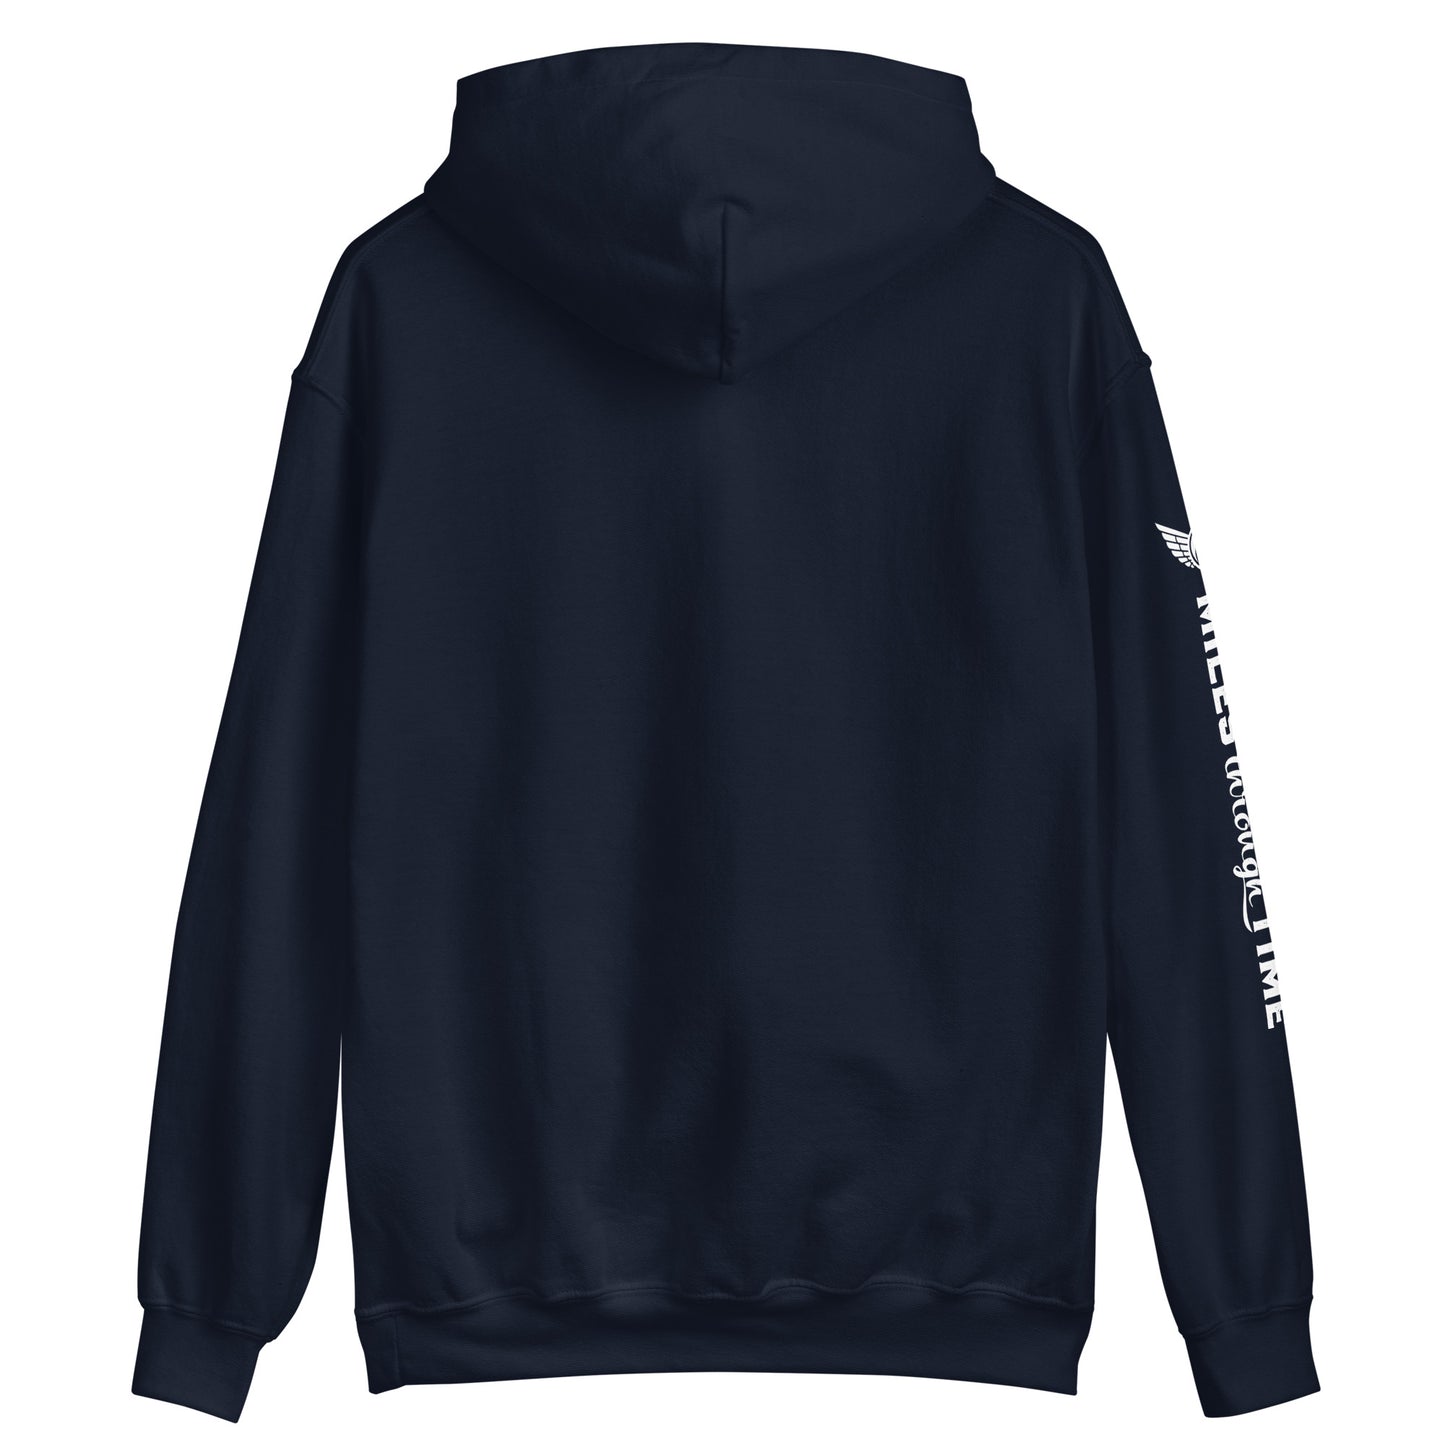 Never Forget Unisex Hoodie